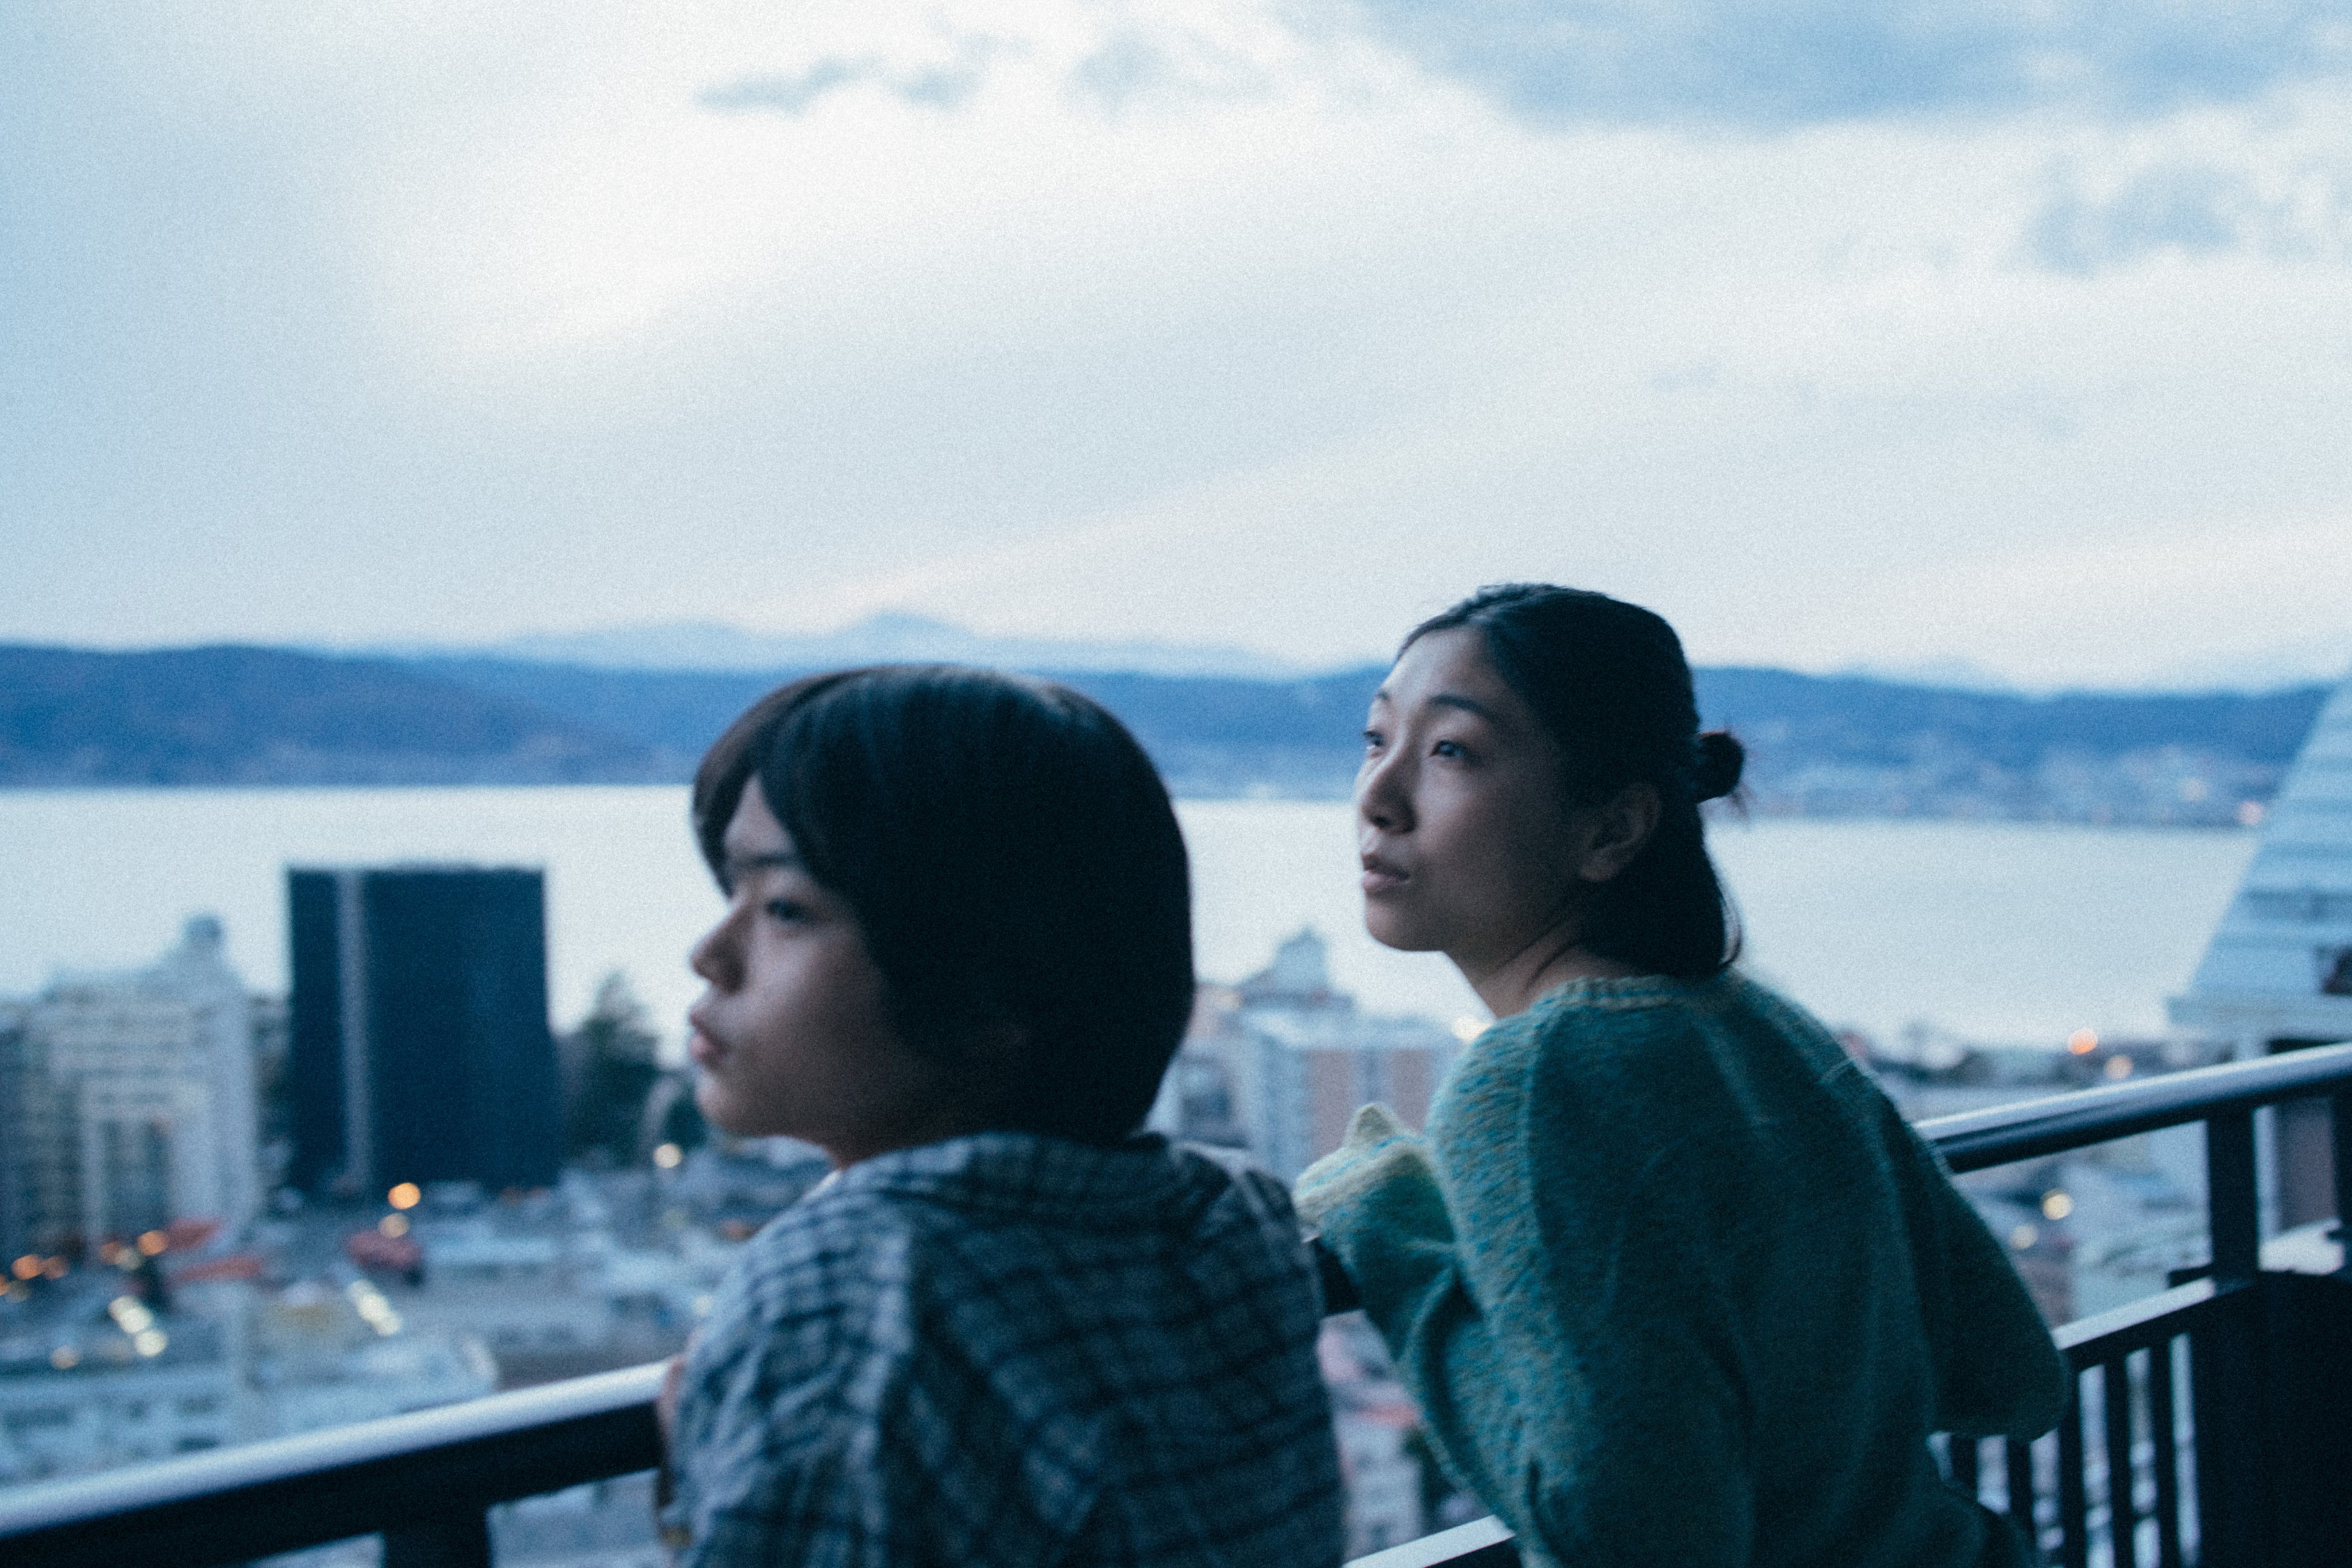 Soya Kurokawa (left) as Minato and Sakura Ando as his mother in a still from “Monster”, Japanese director Hirokazu Koreeda’s latest film, which premiered in competition at the 2023 Cannes Film Festival. Eita Nagayama co-stars.